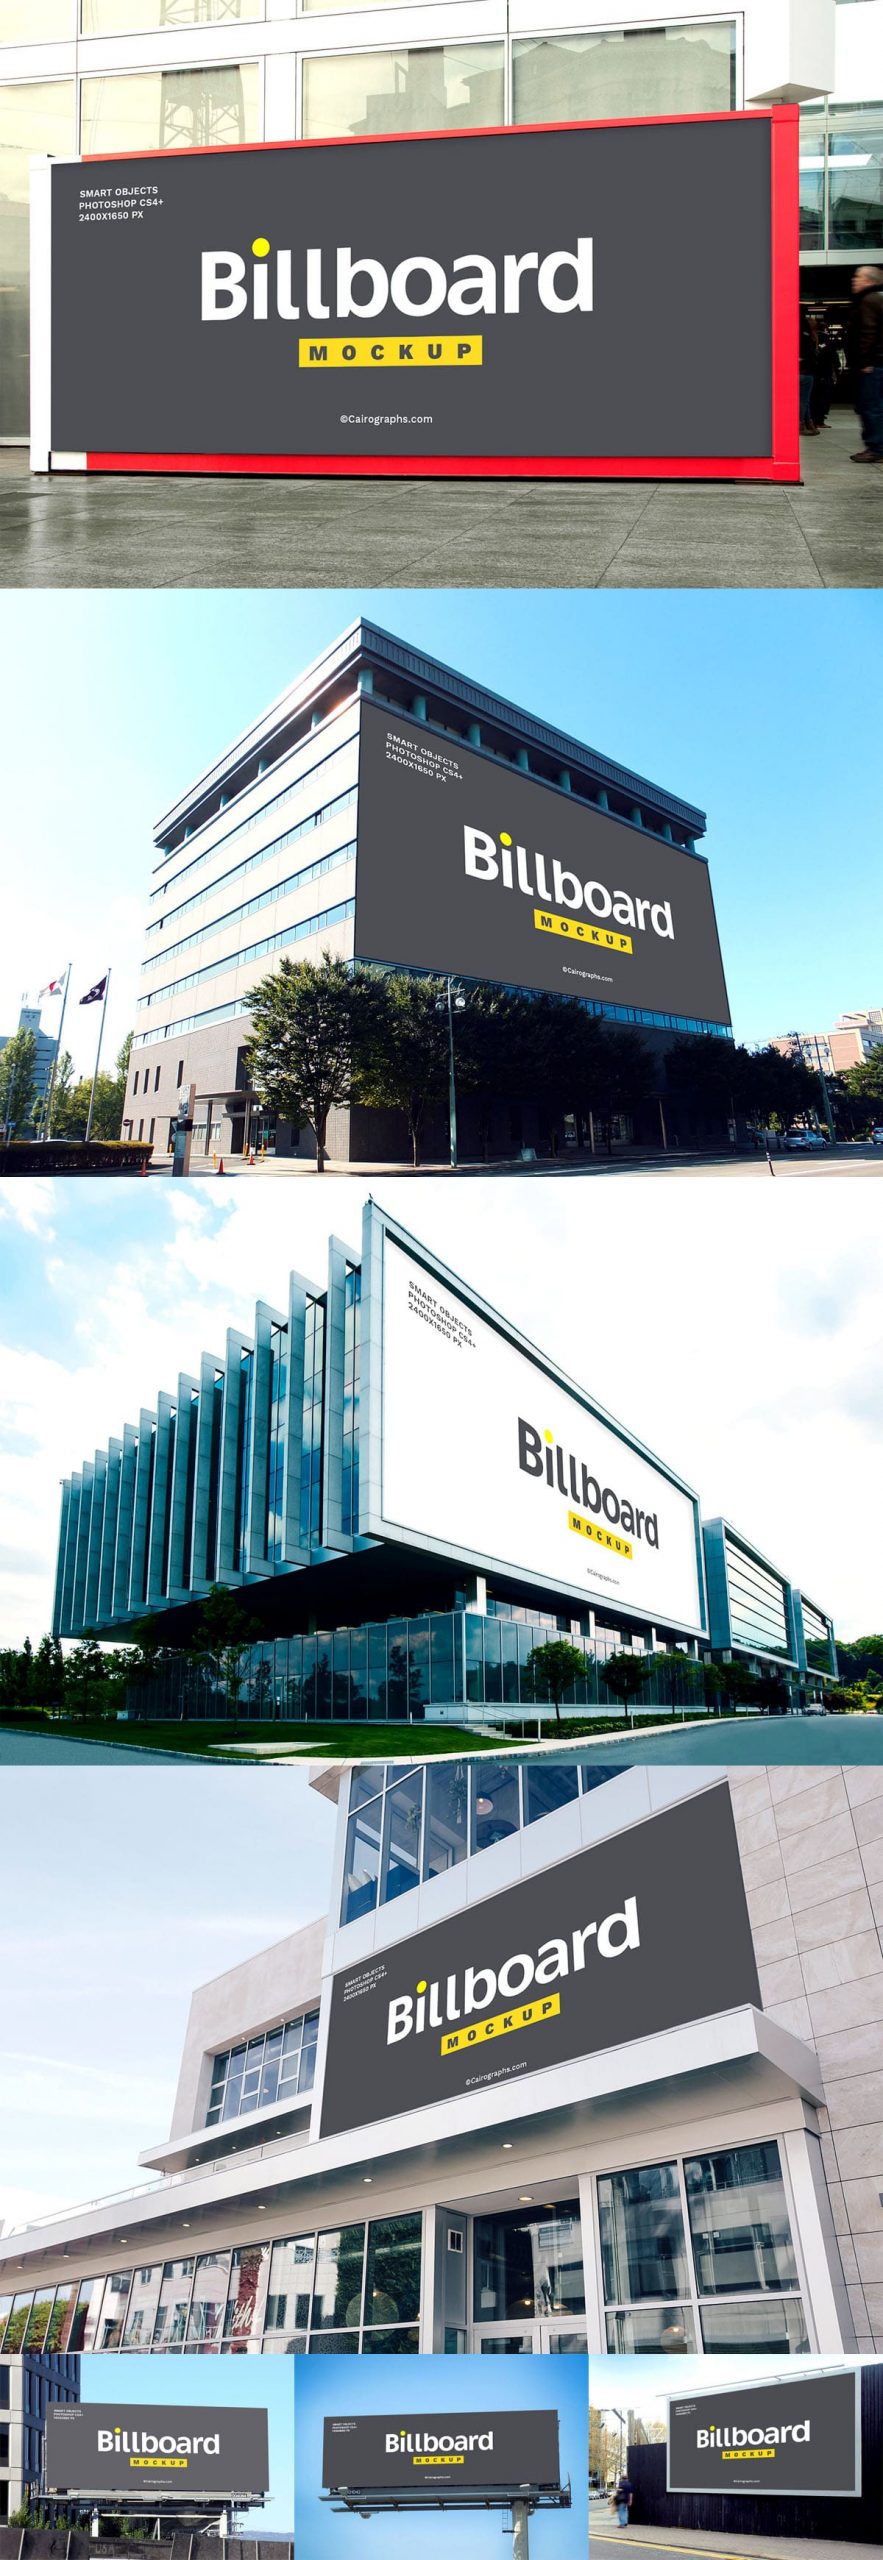 Download Free Billboards Mockups PSD - Find the Perfect Creative Mockups Freebies to Showcase your ...